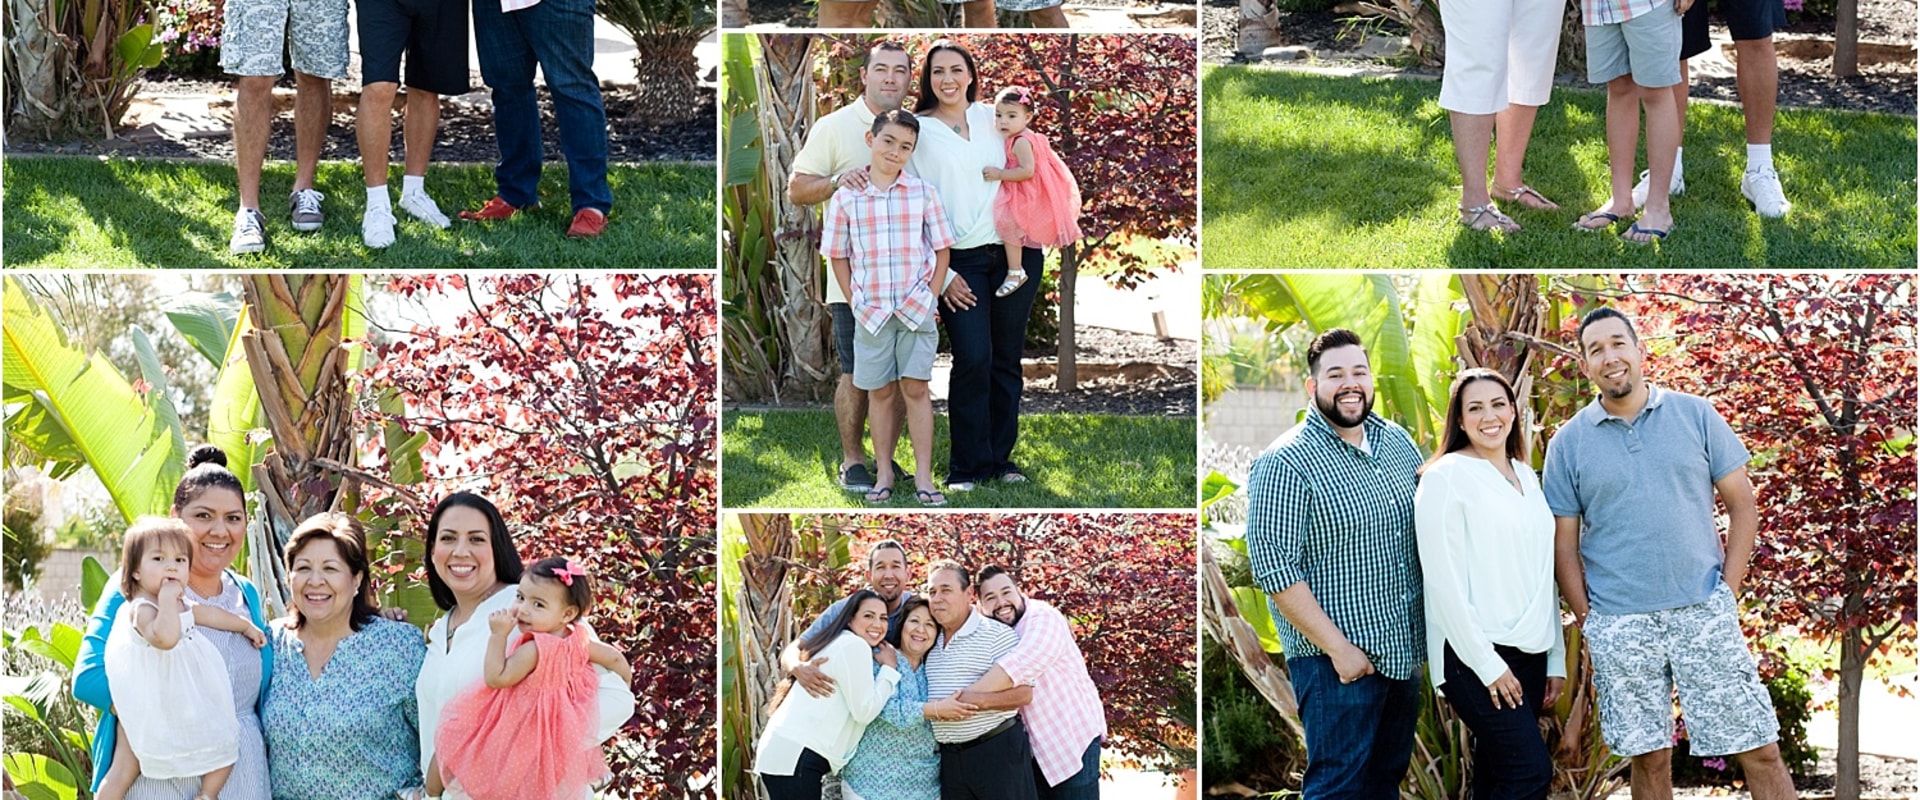 Group Family Photography Poses: Tips and Ideas